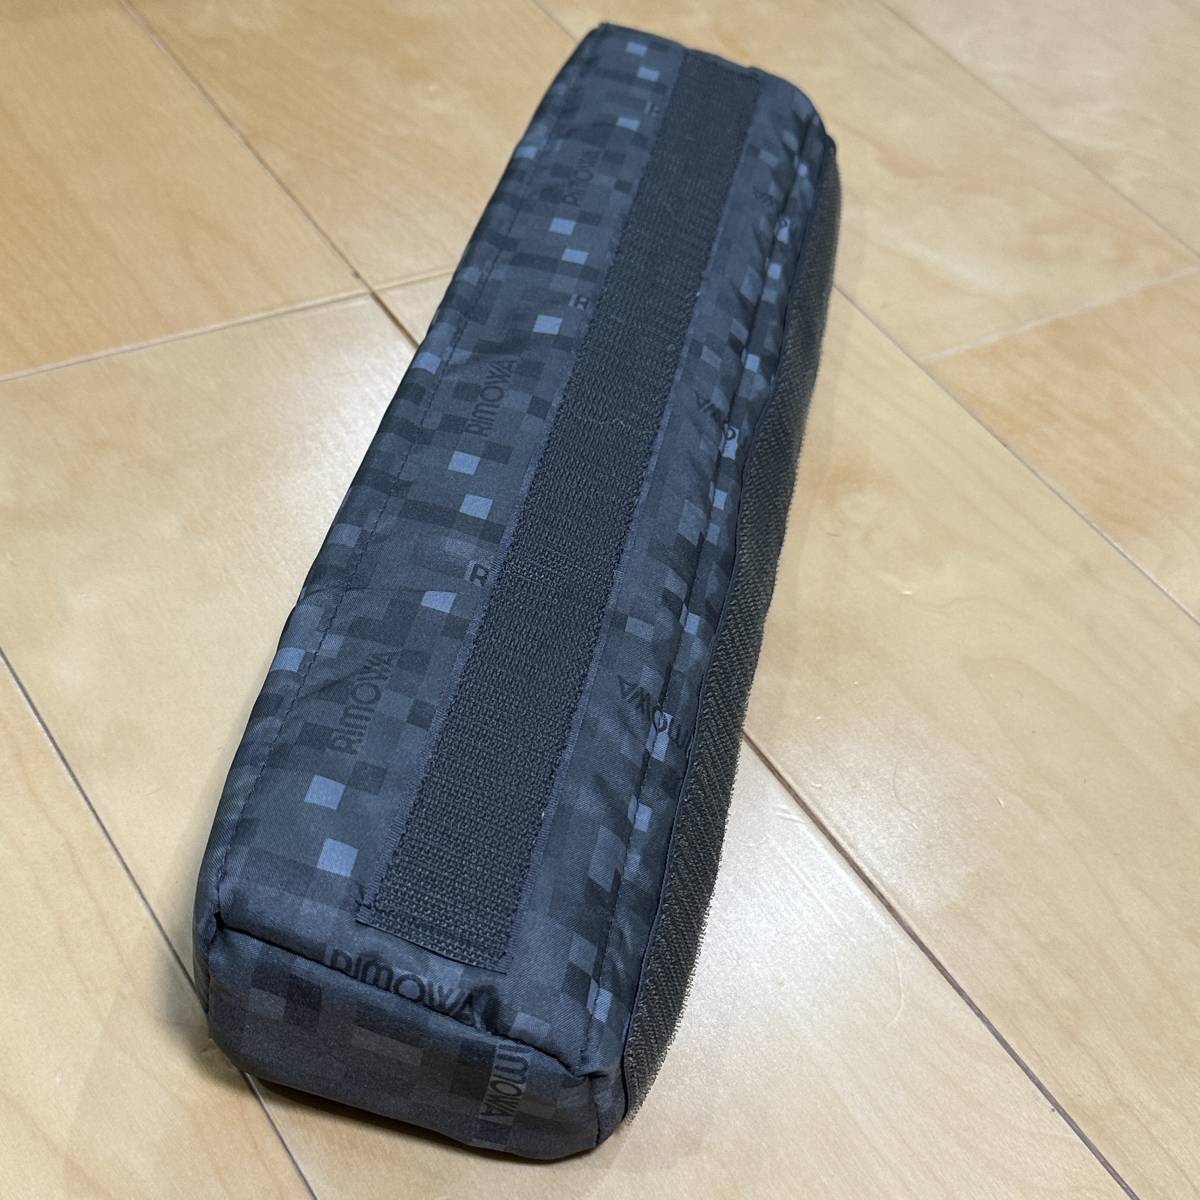 RIMOWA Rimowa business to lorry accessory folding umbrella inserting case suitcase accessory genuine products inner bag ③